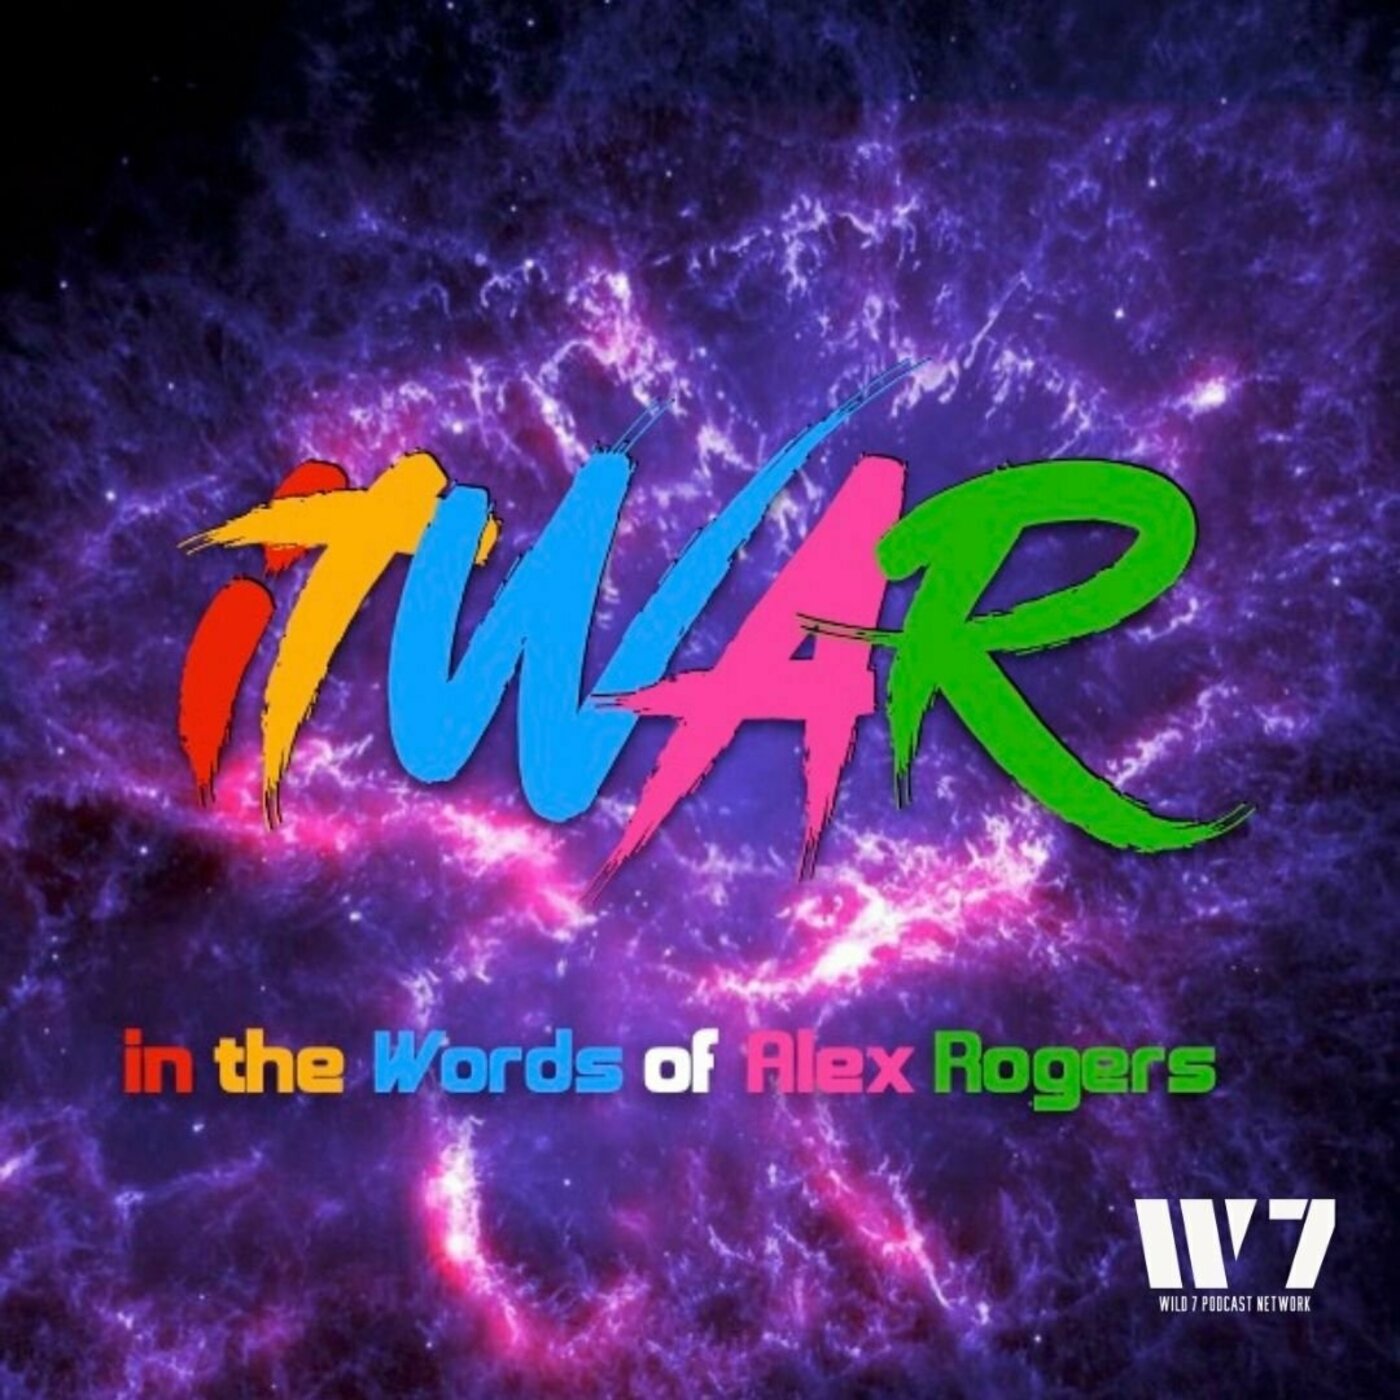 ITWAR - Episode 46: IT’S A GOOD LIFE IF I’M PAYING ATTENTION - In the Words of Alex Rogers